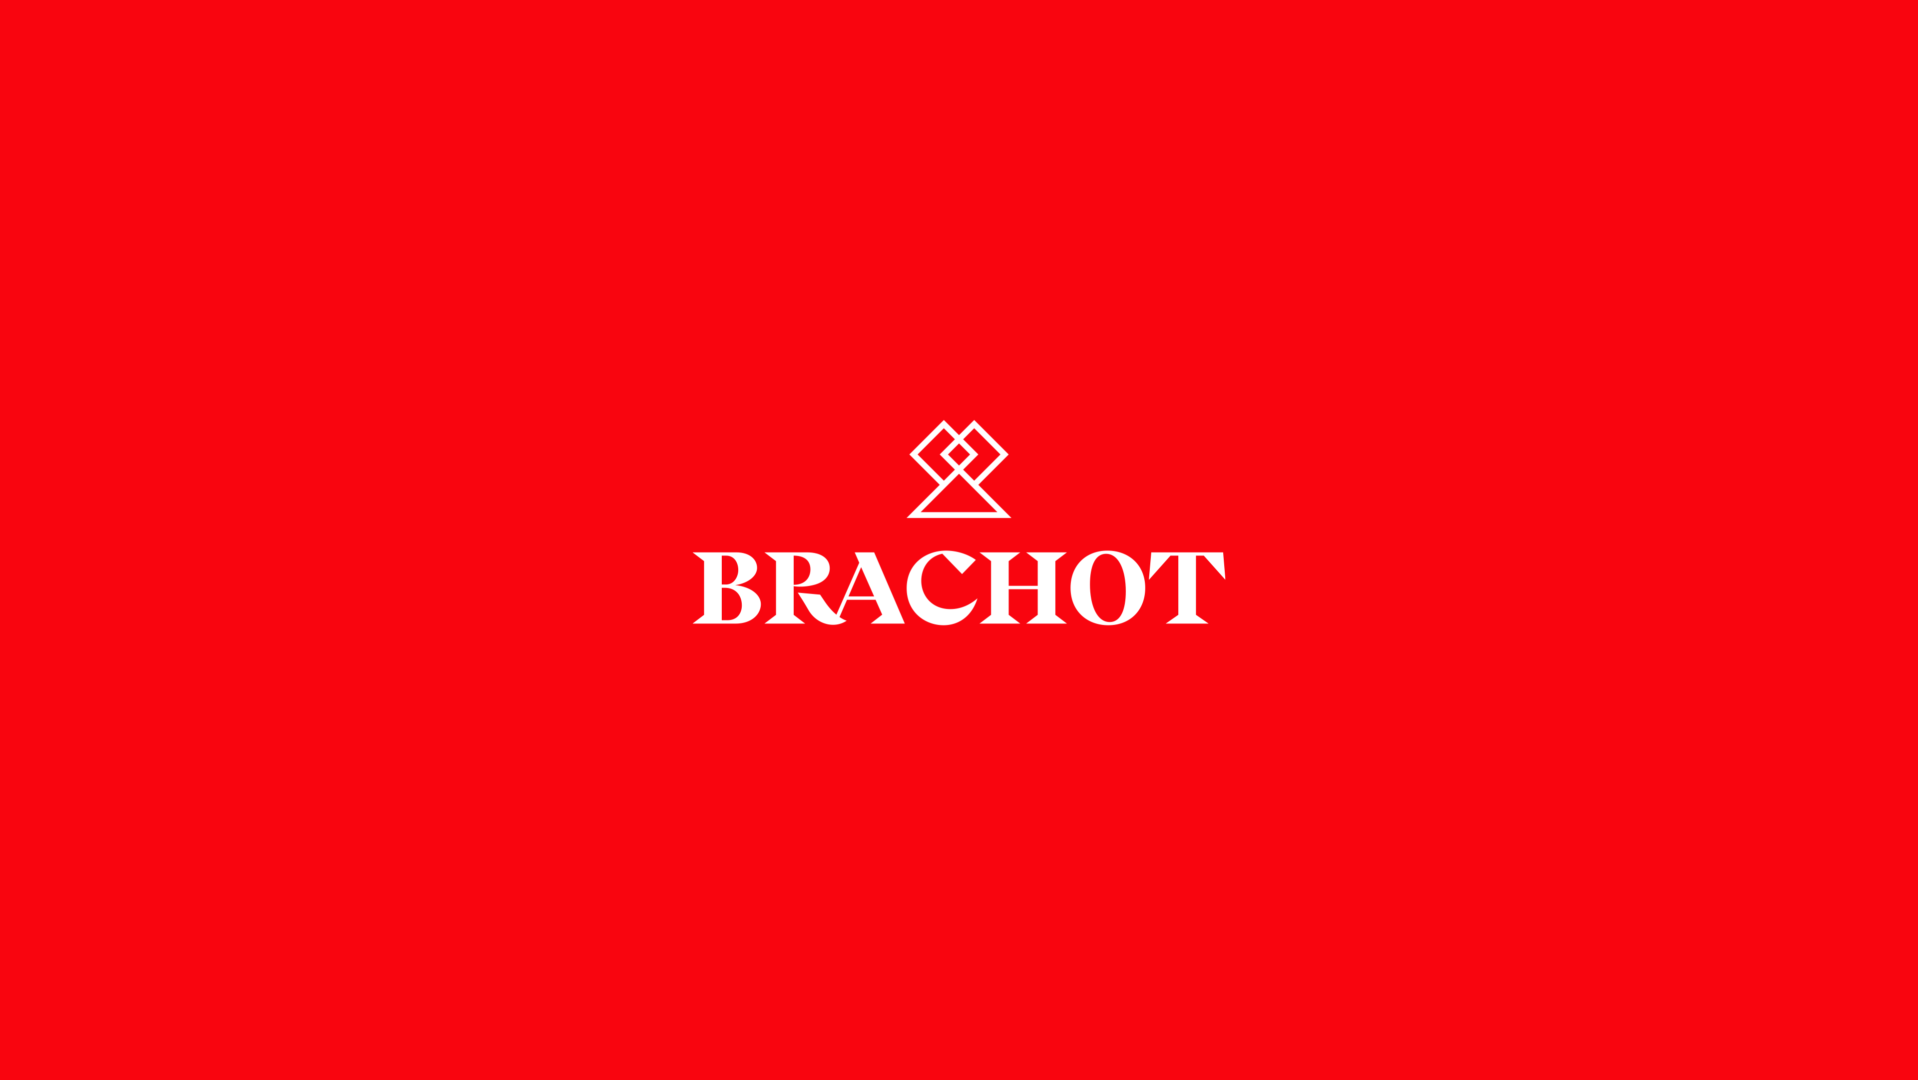 Brachot-Hermant branding - Building a solidified family founded on the Brachot heritage